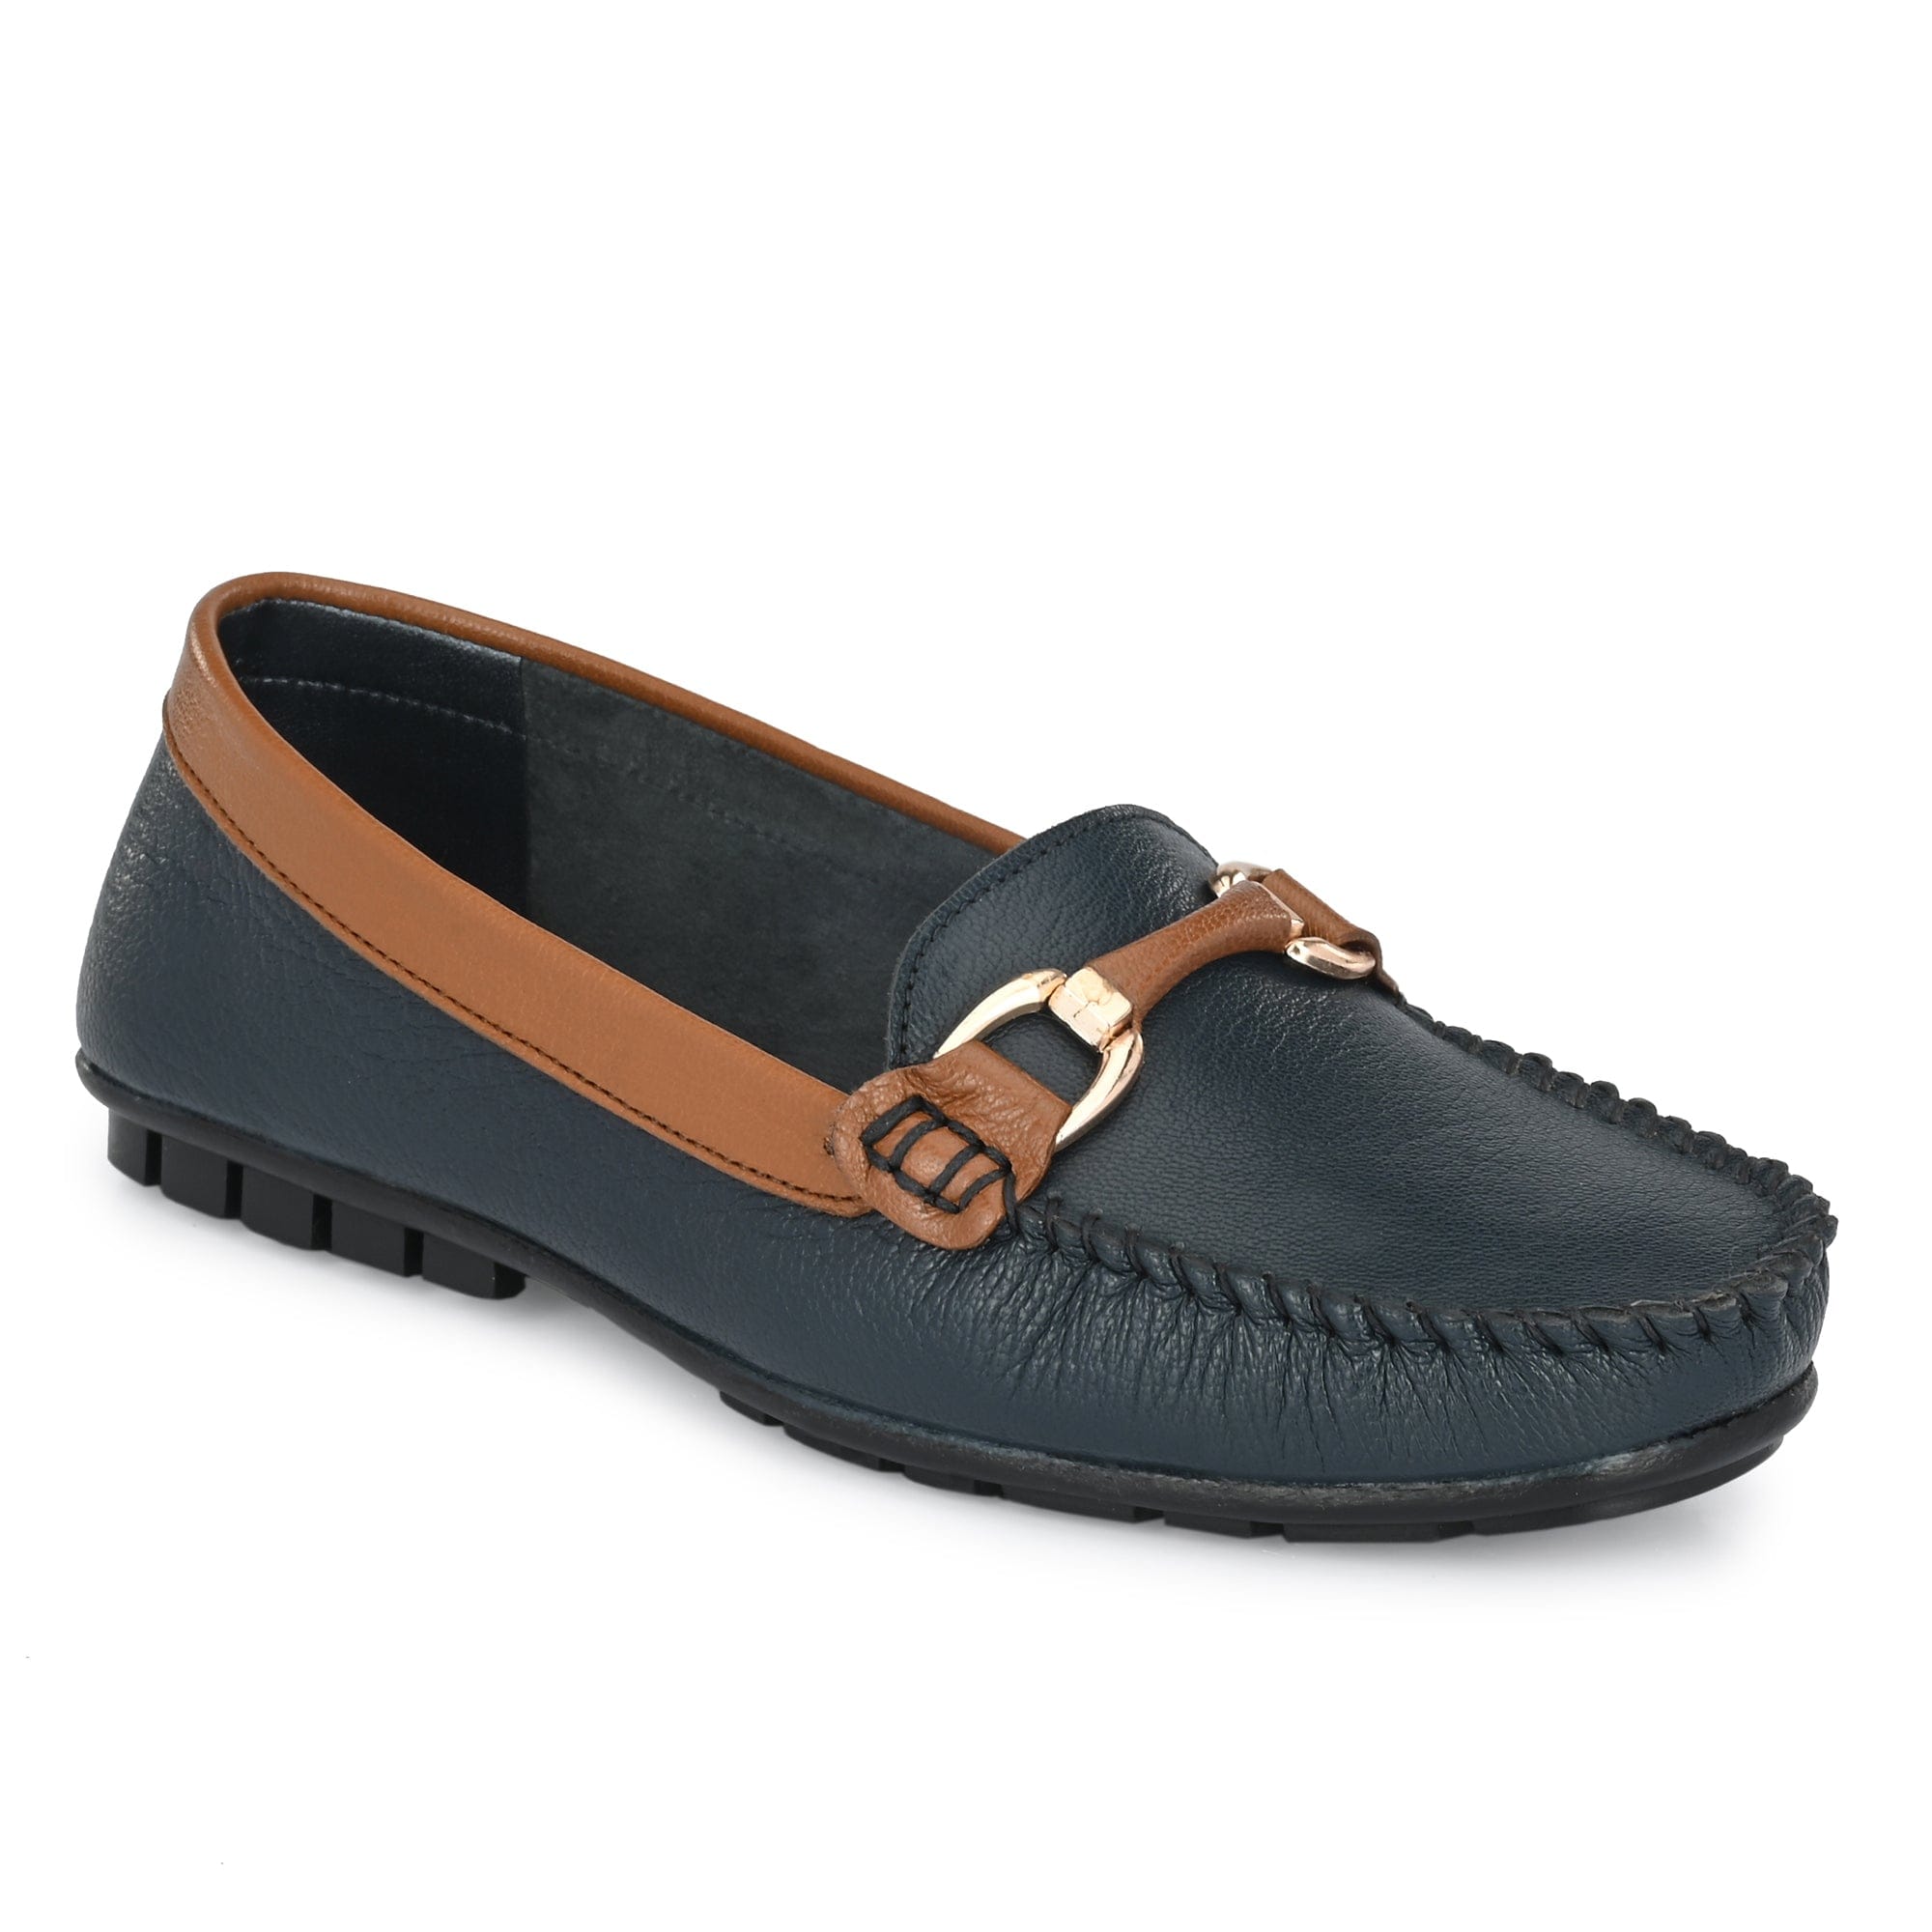 Dual Tone Buckled Loafers For Women egoss-shoes